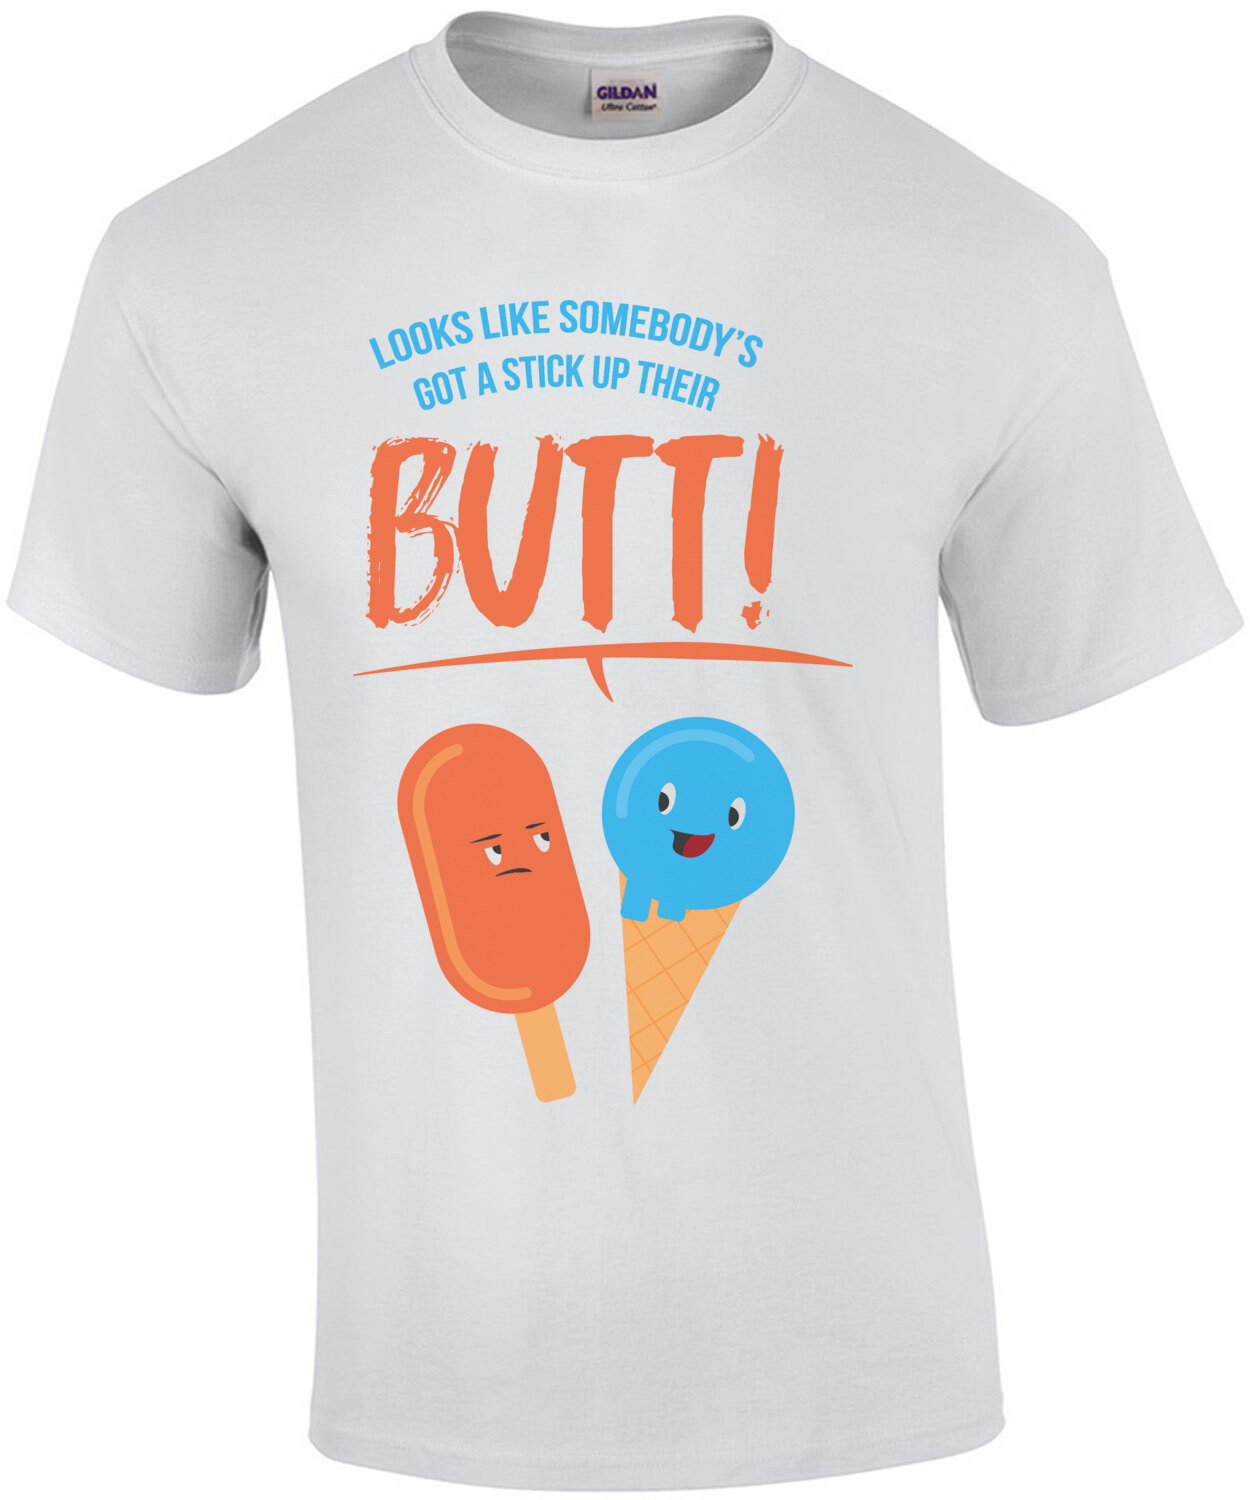 Looks like somebody's got a stick up their butt - funny t-shirt